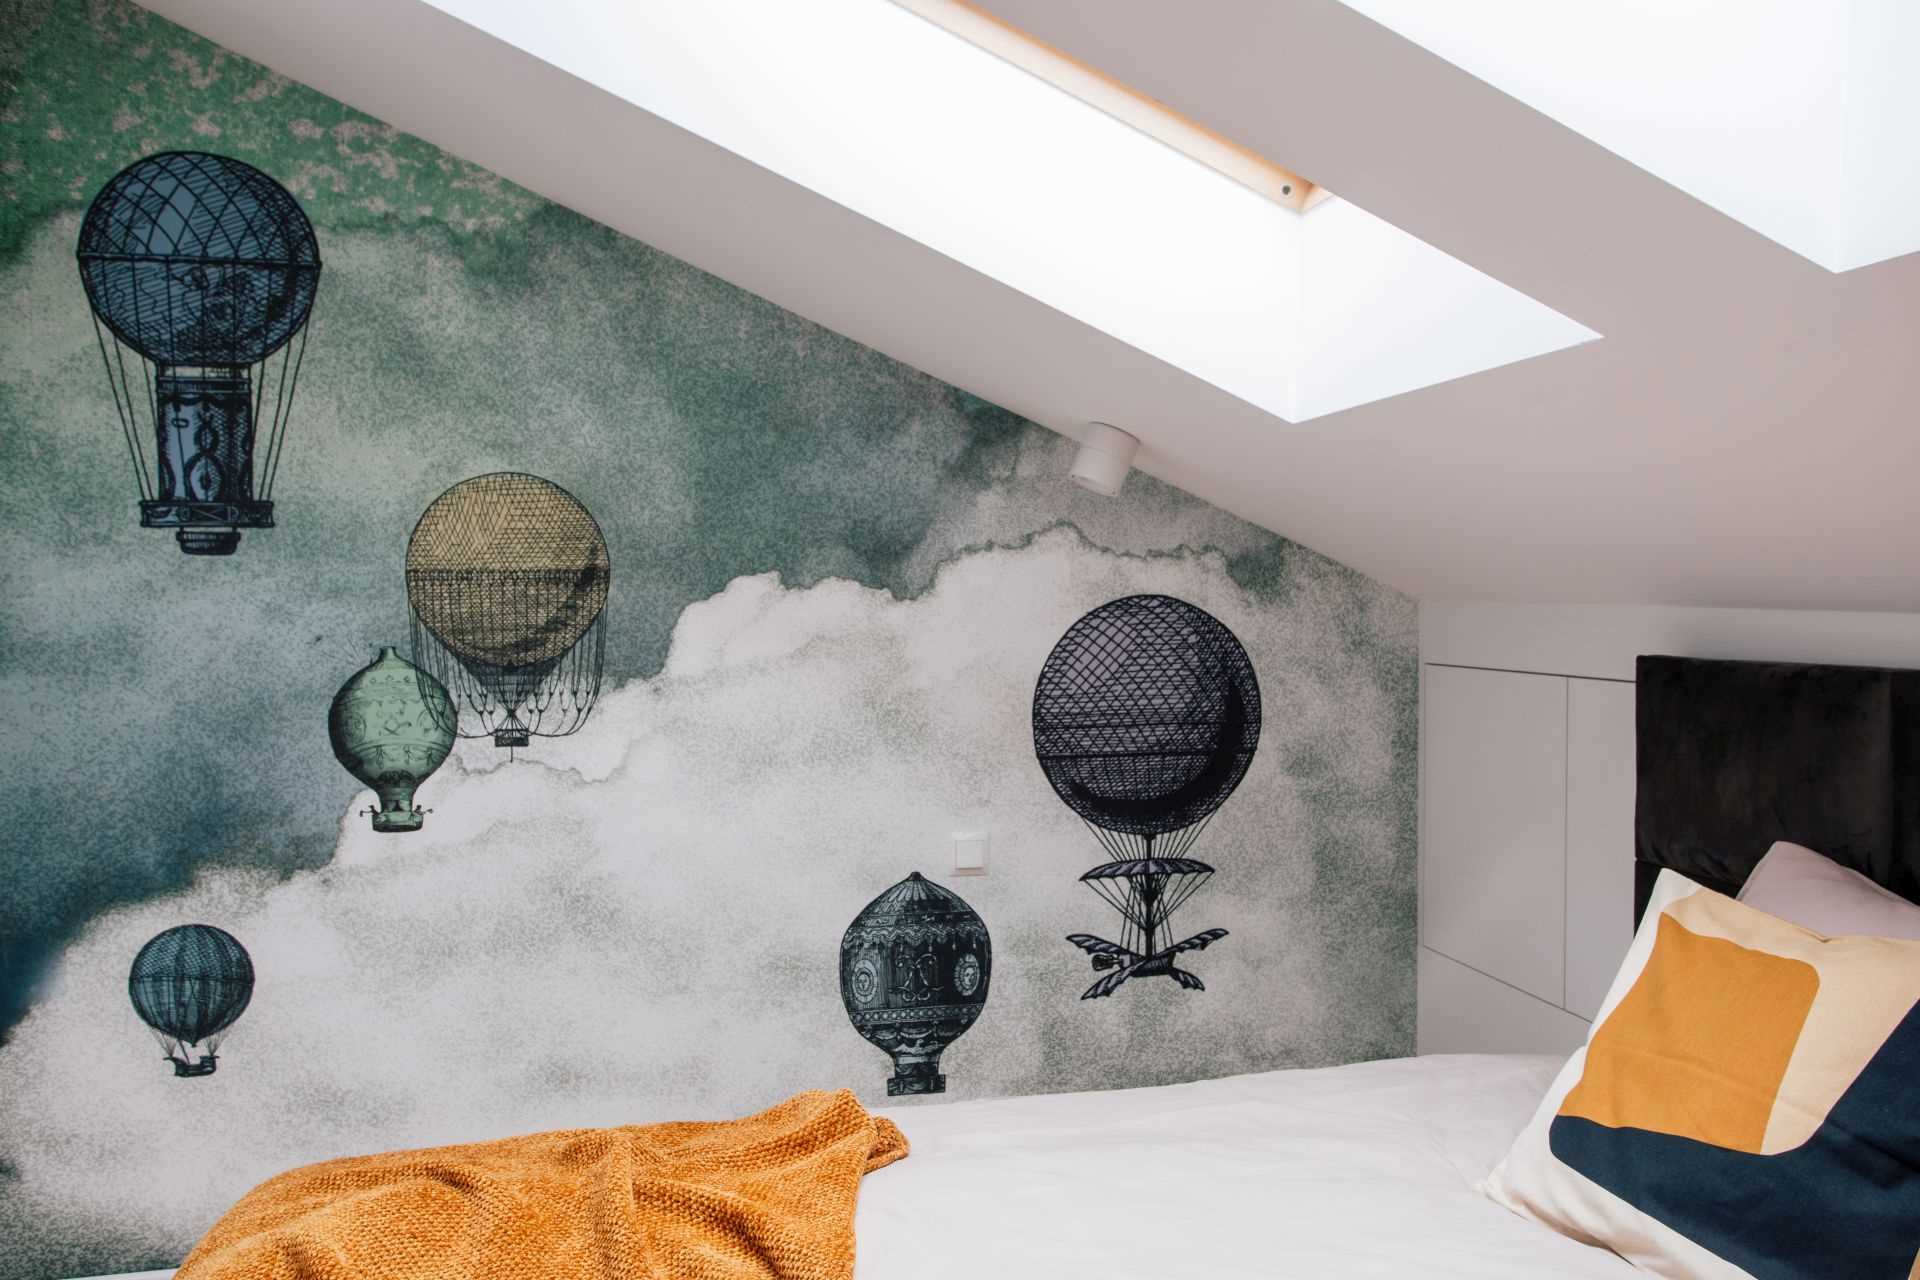 In this modern bedroom, there's multiple skylights, a built-in bench, and a wallpaper with a hot air balloon print.